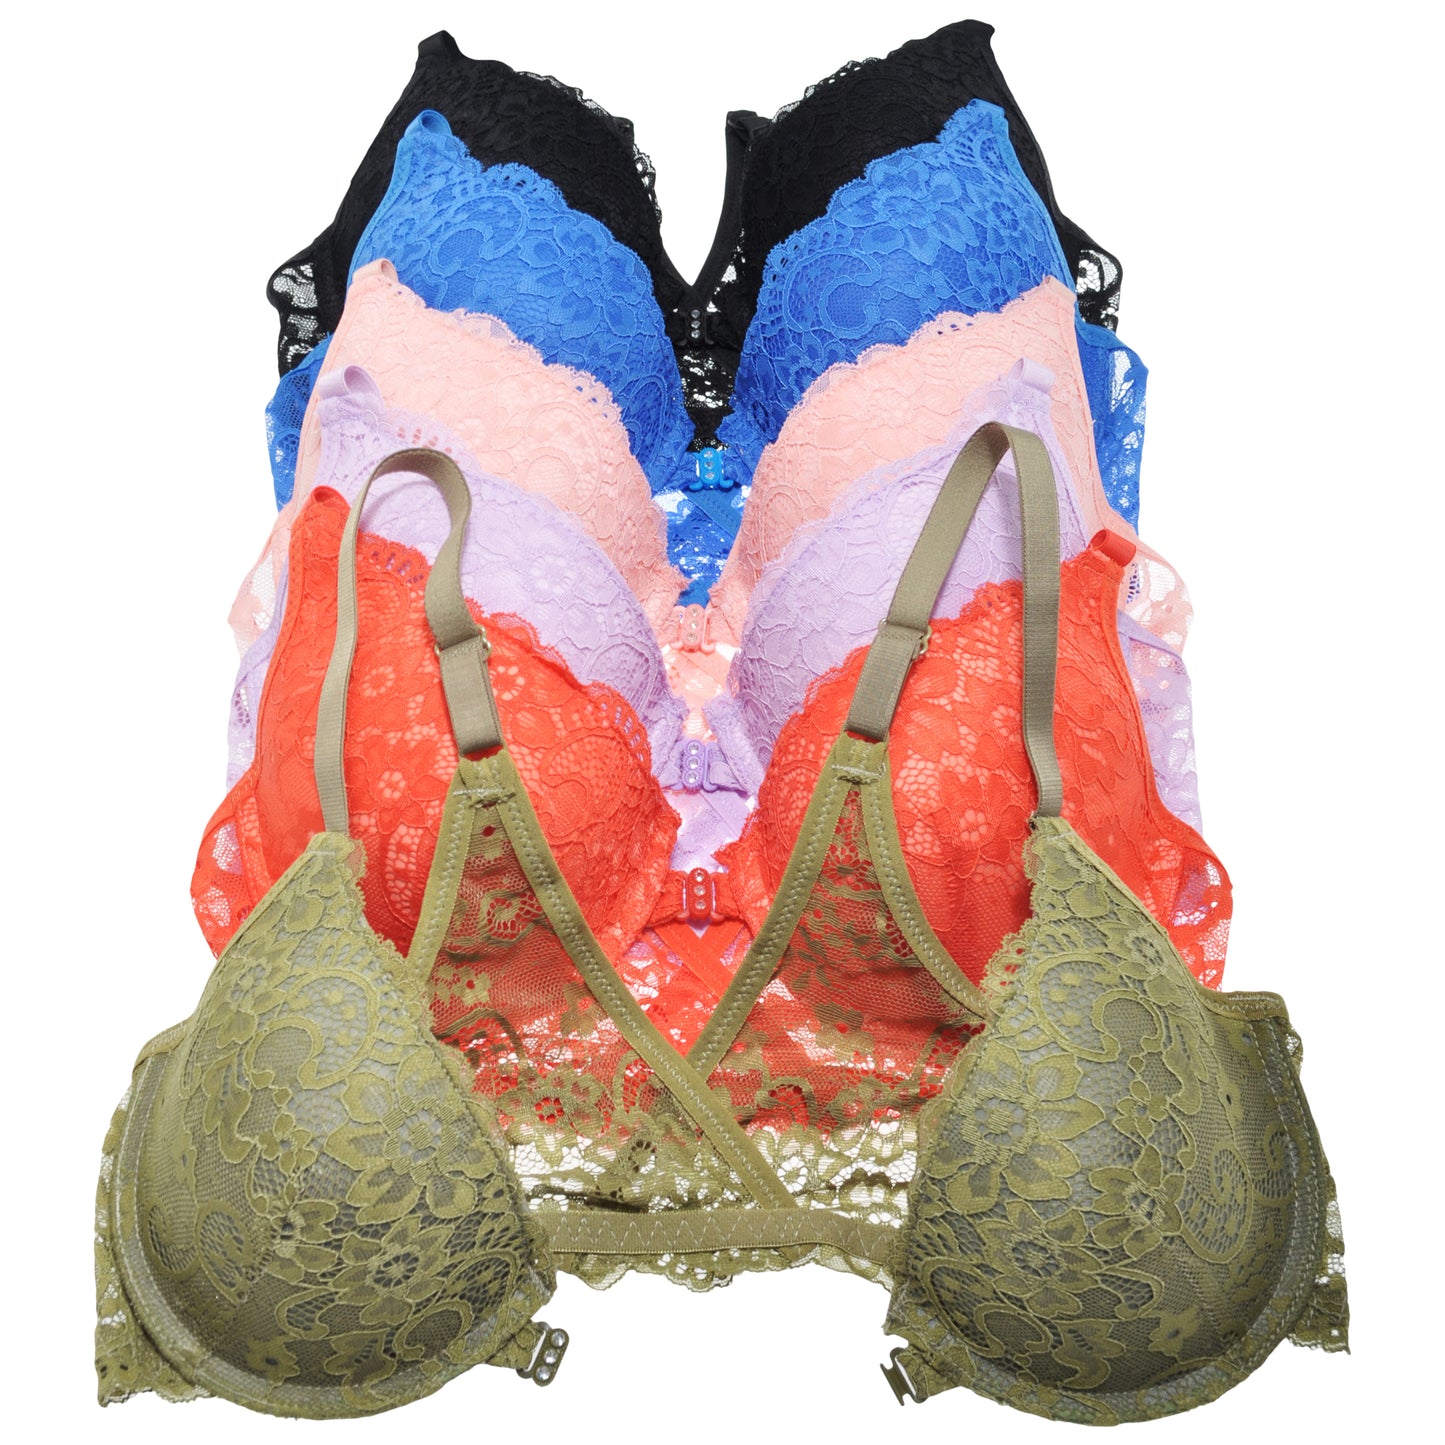 Matching Bras and Panties Set with Floral Lace Design (6 or 12 Pack)